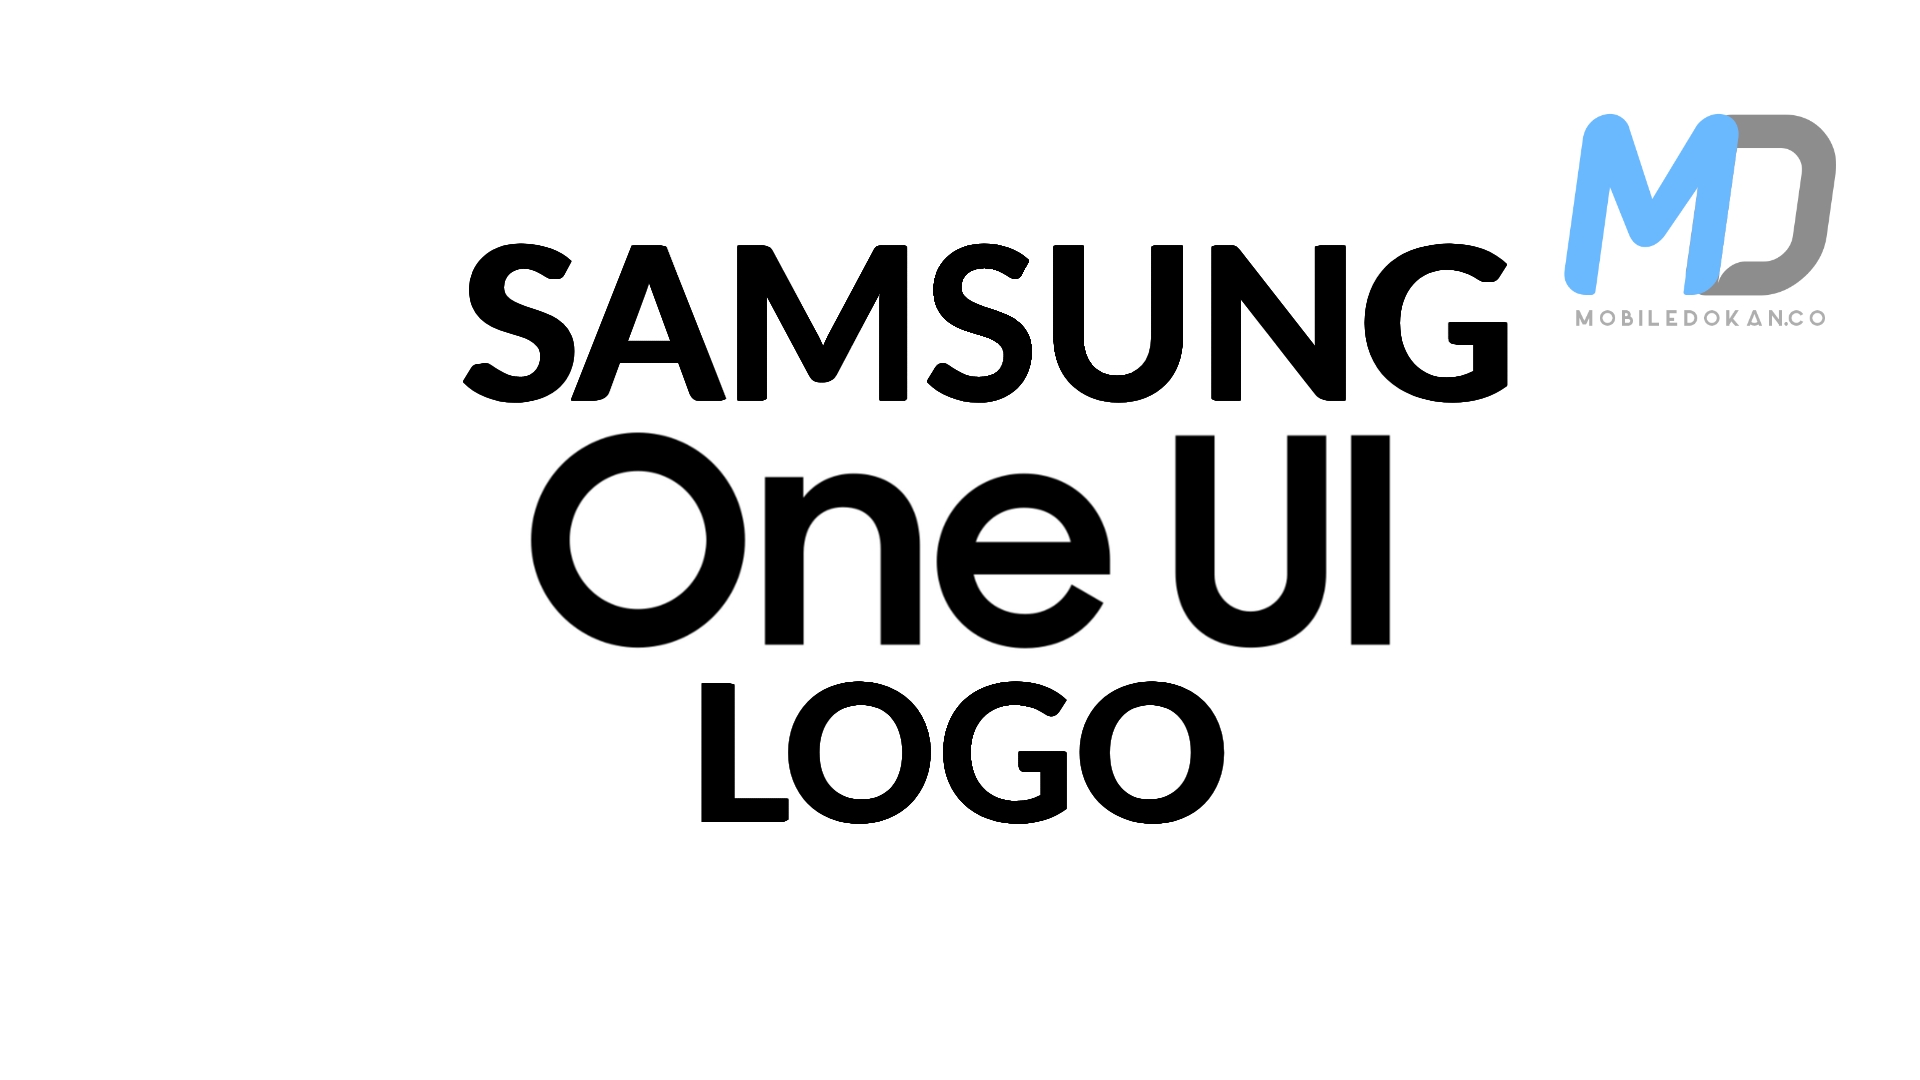 Samsung One UI 4.0 beta based on Android 12 could release in August